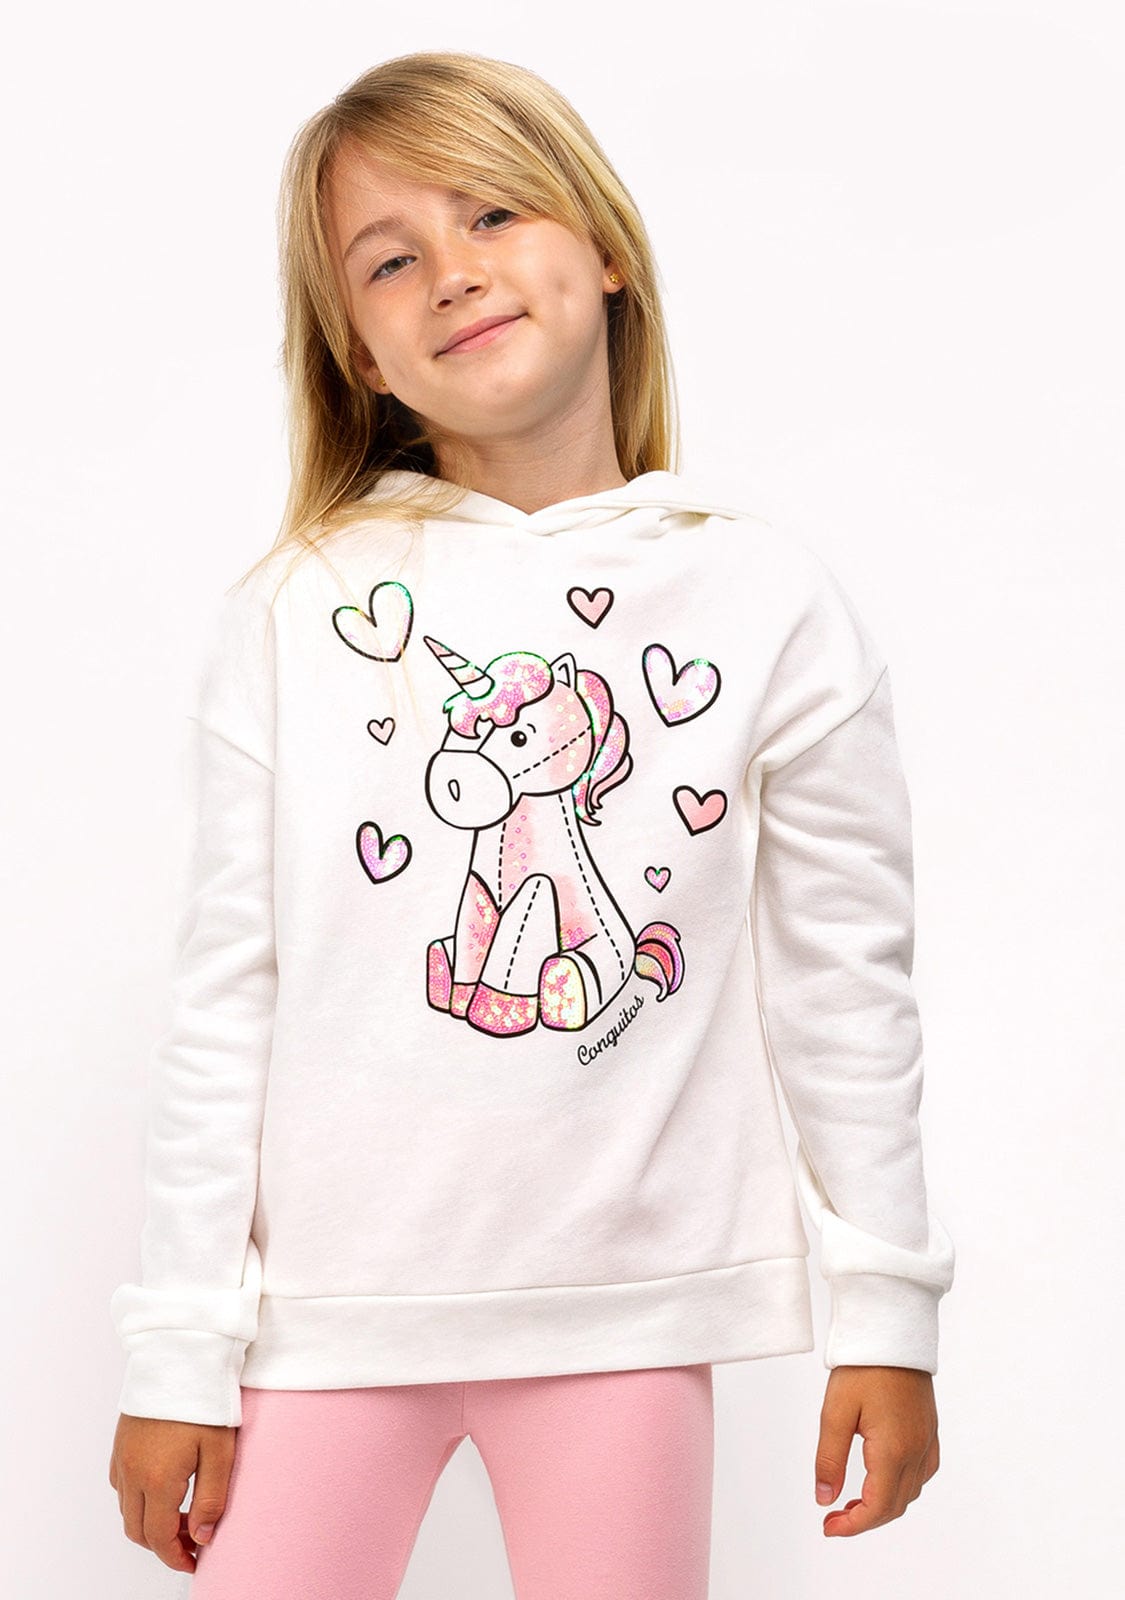 CONGUITOS TEXTIL Clothing Girl's Teddy Unicorn Hoodie